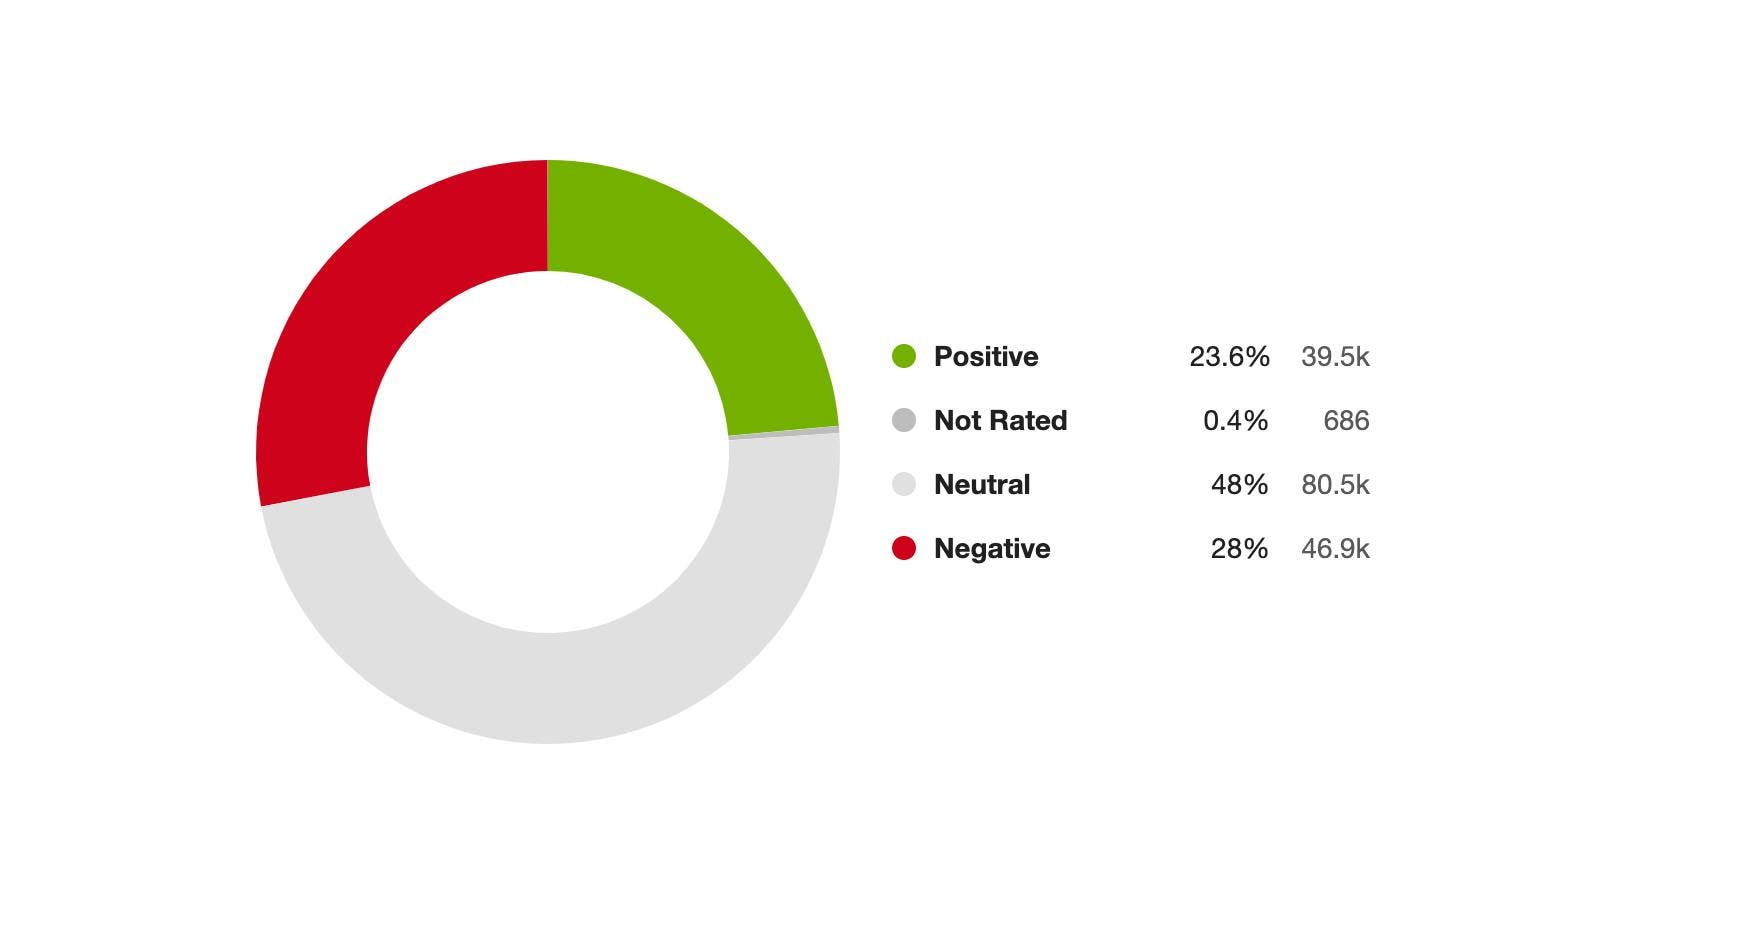 A ring sentiment chart showing 23.6% positive sentiment, 0.4% not rated, 48% neutral sentiment, and 28% negative sentiment.